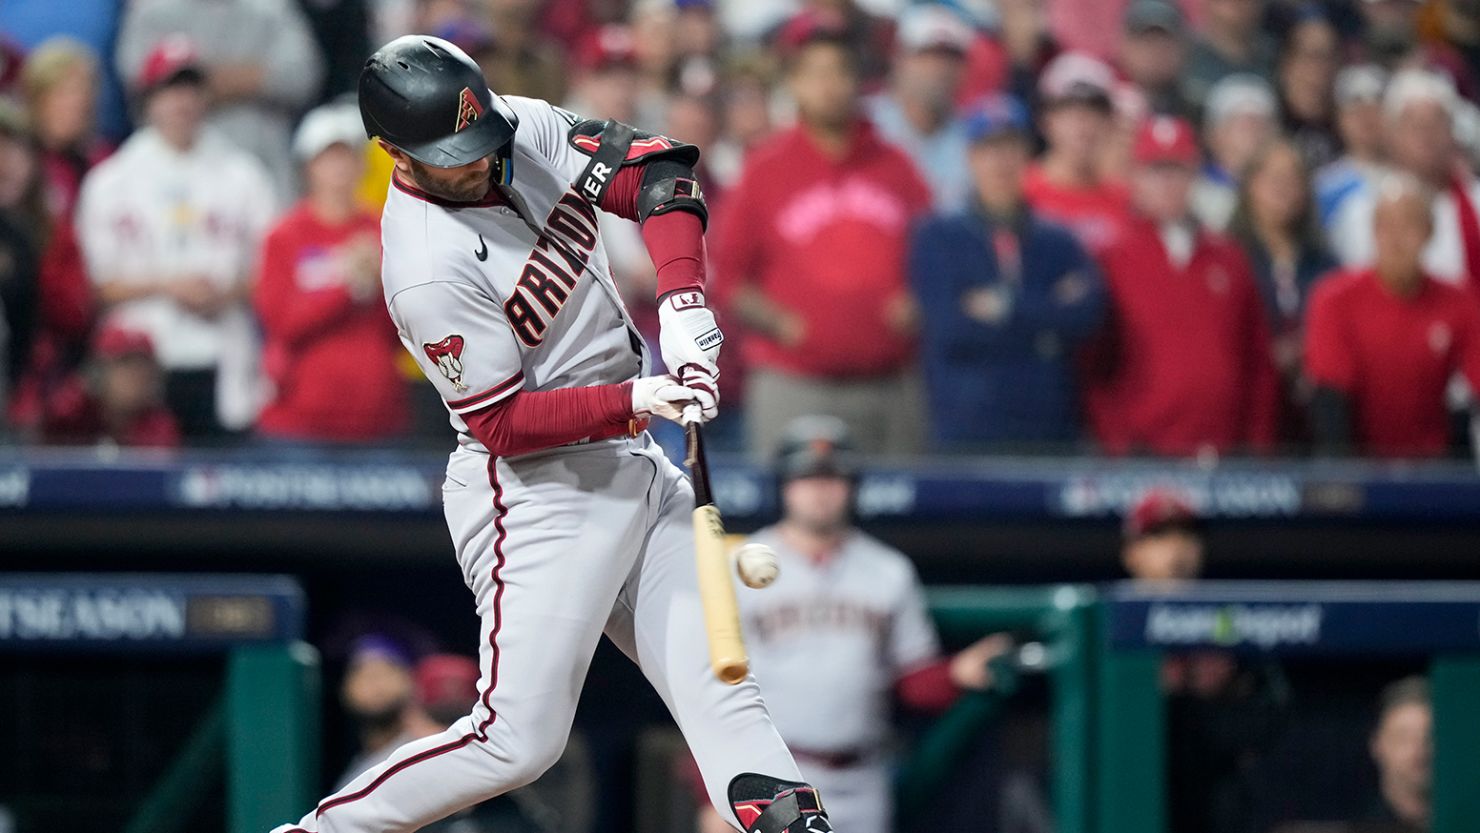 The Arizona Diamondbacks' Christian Walker breaks his bat and scores a run on a fielder's choice against the Philadelphia Phillies during the first inning on Tuesday.